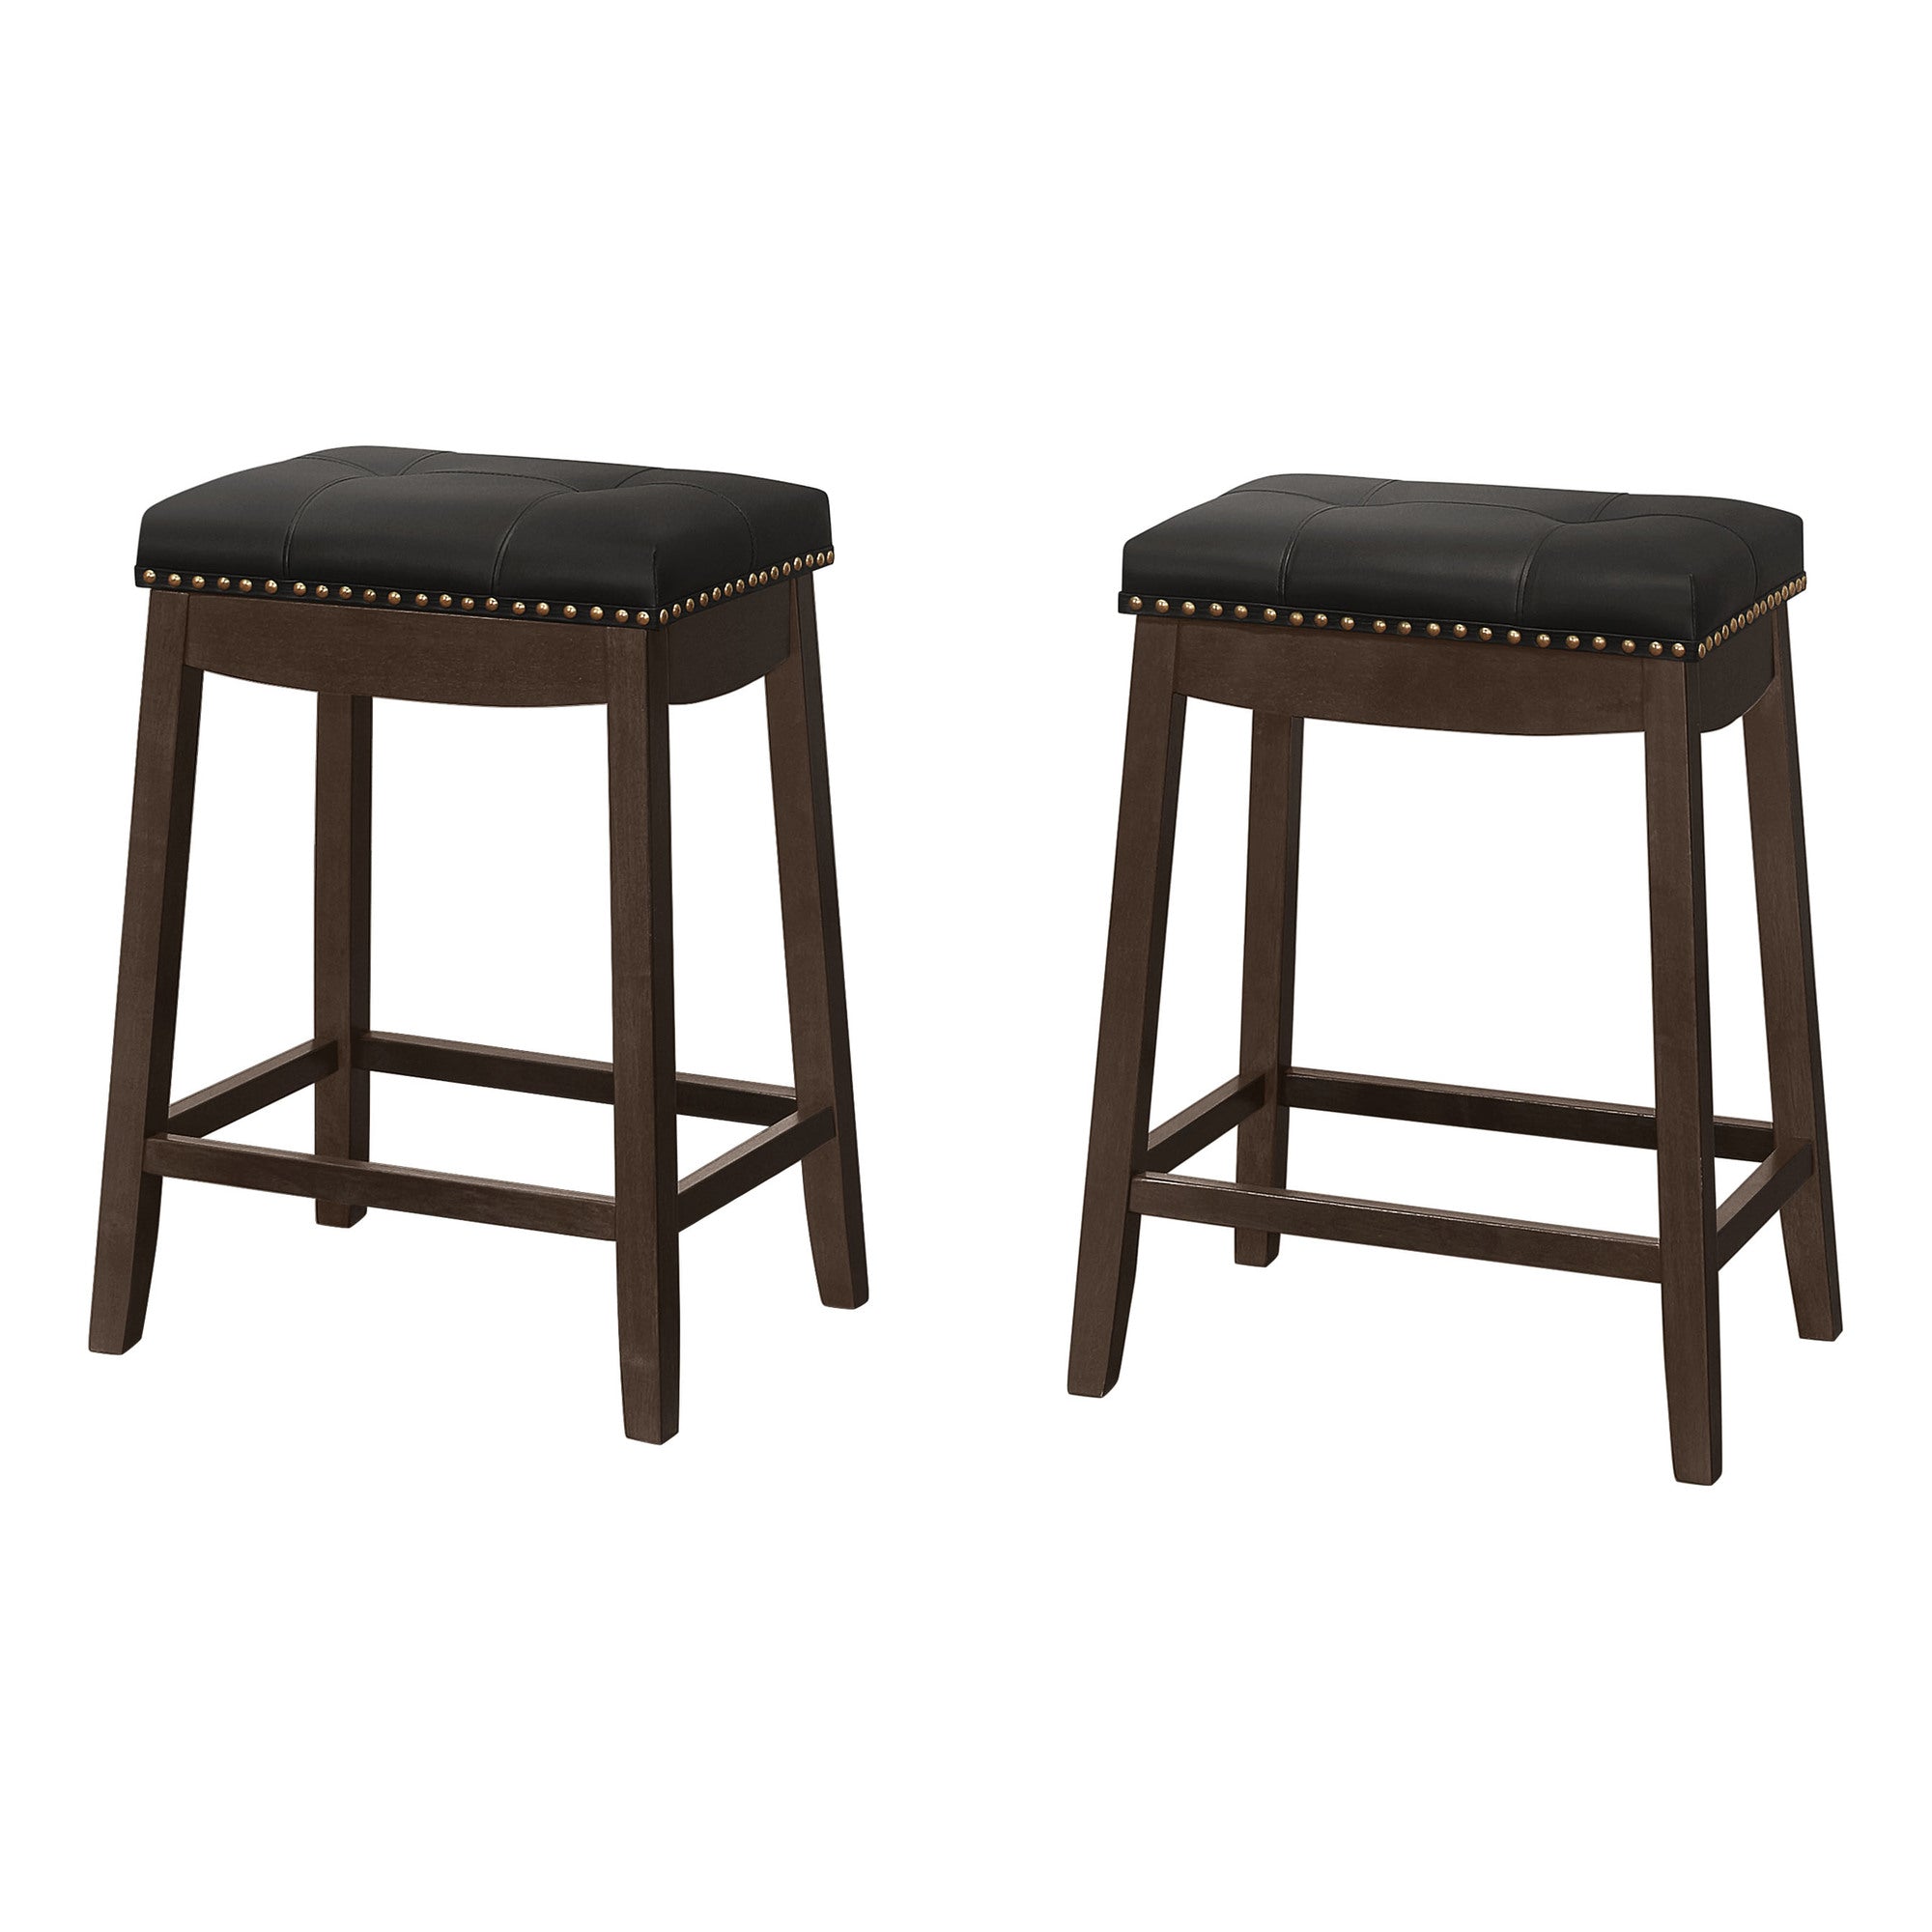 MN-191261    Barstool - Set Of 2 / Tufted / Nailhead Trim / Upholstered / Counter Height - 24"H - Espresso / Black Leather-Look / Brass